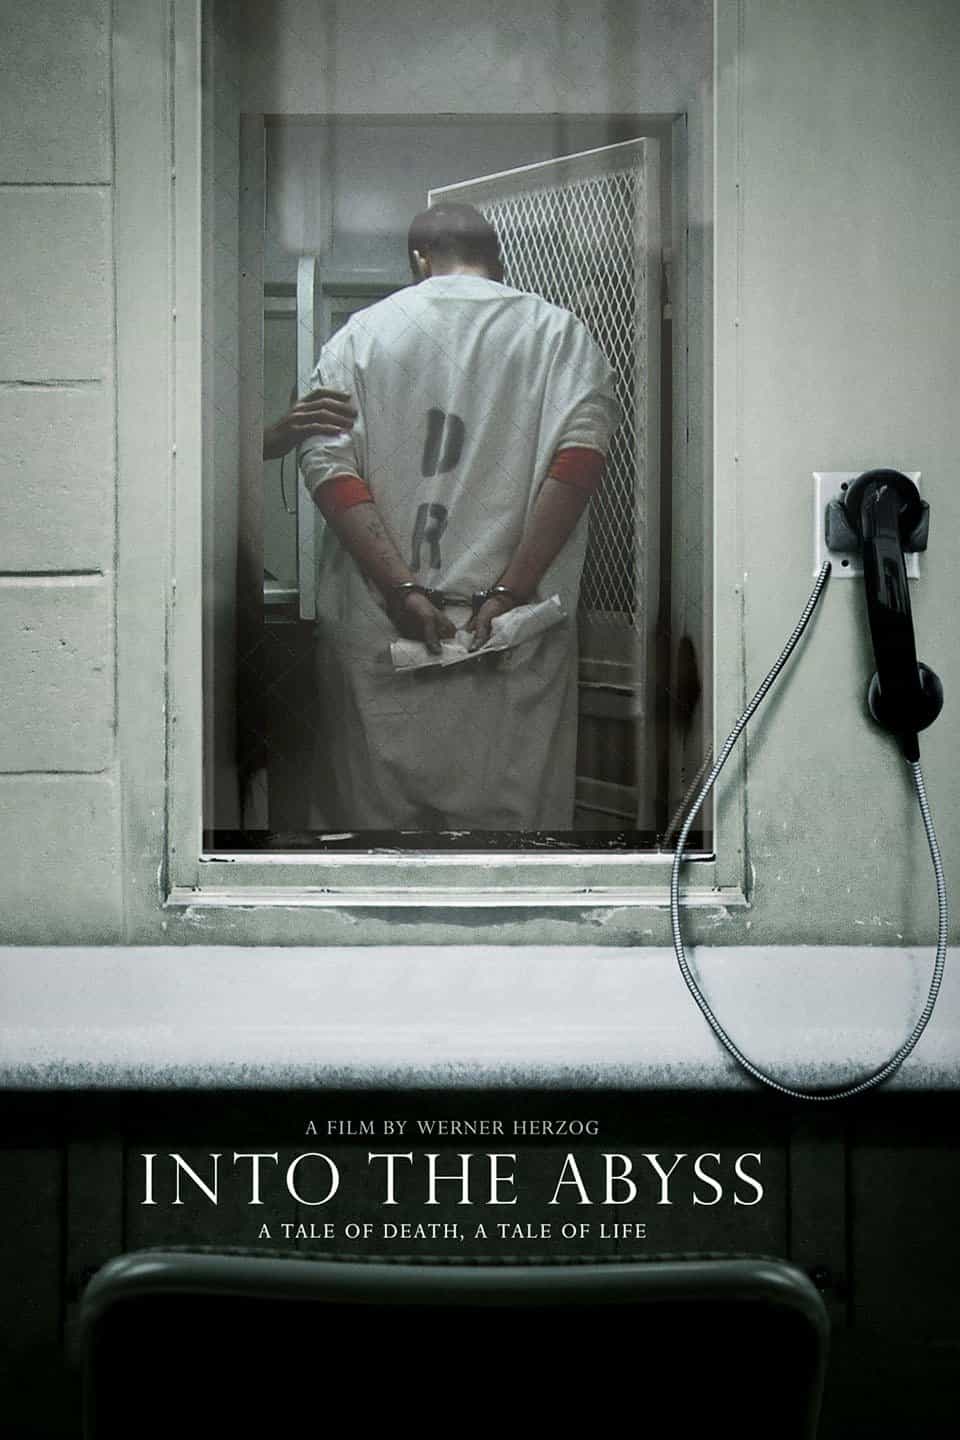 Into the Abyss: A Tale of Death a Tale of Life